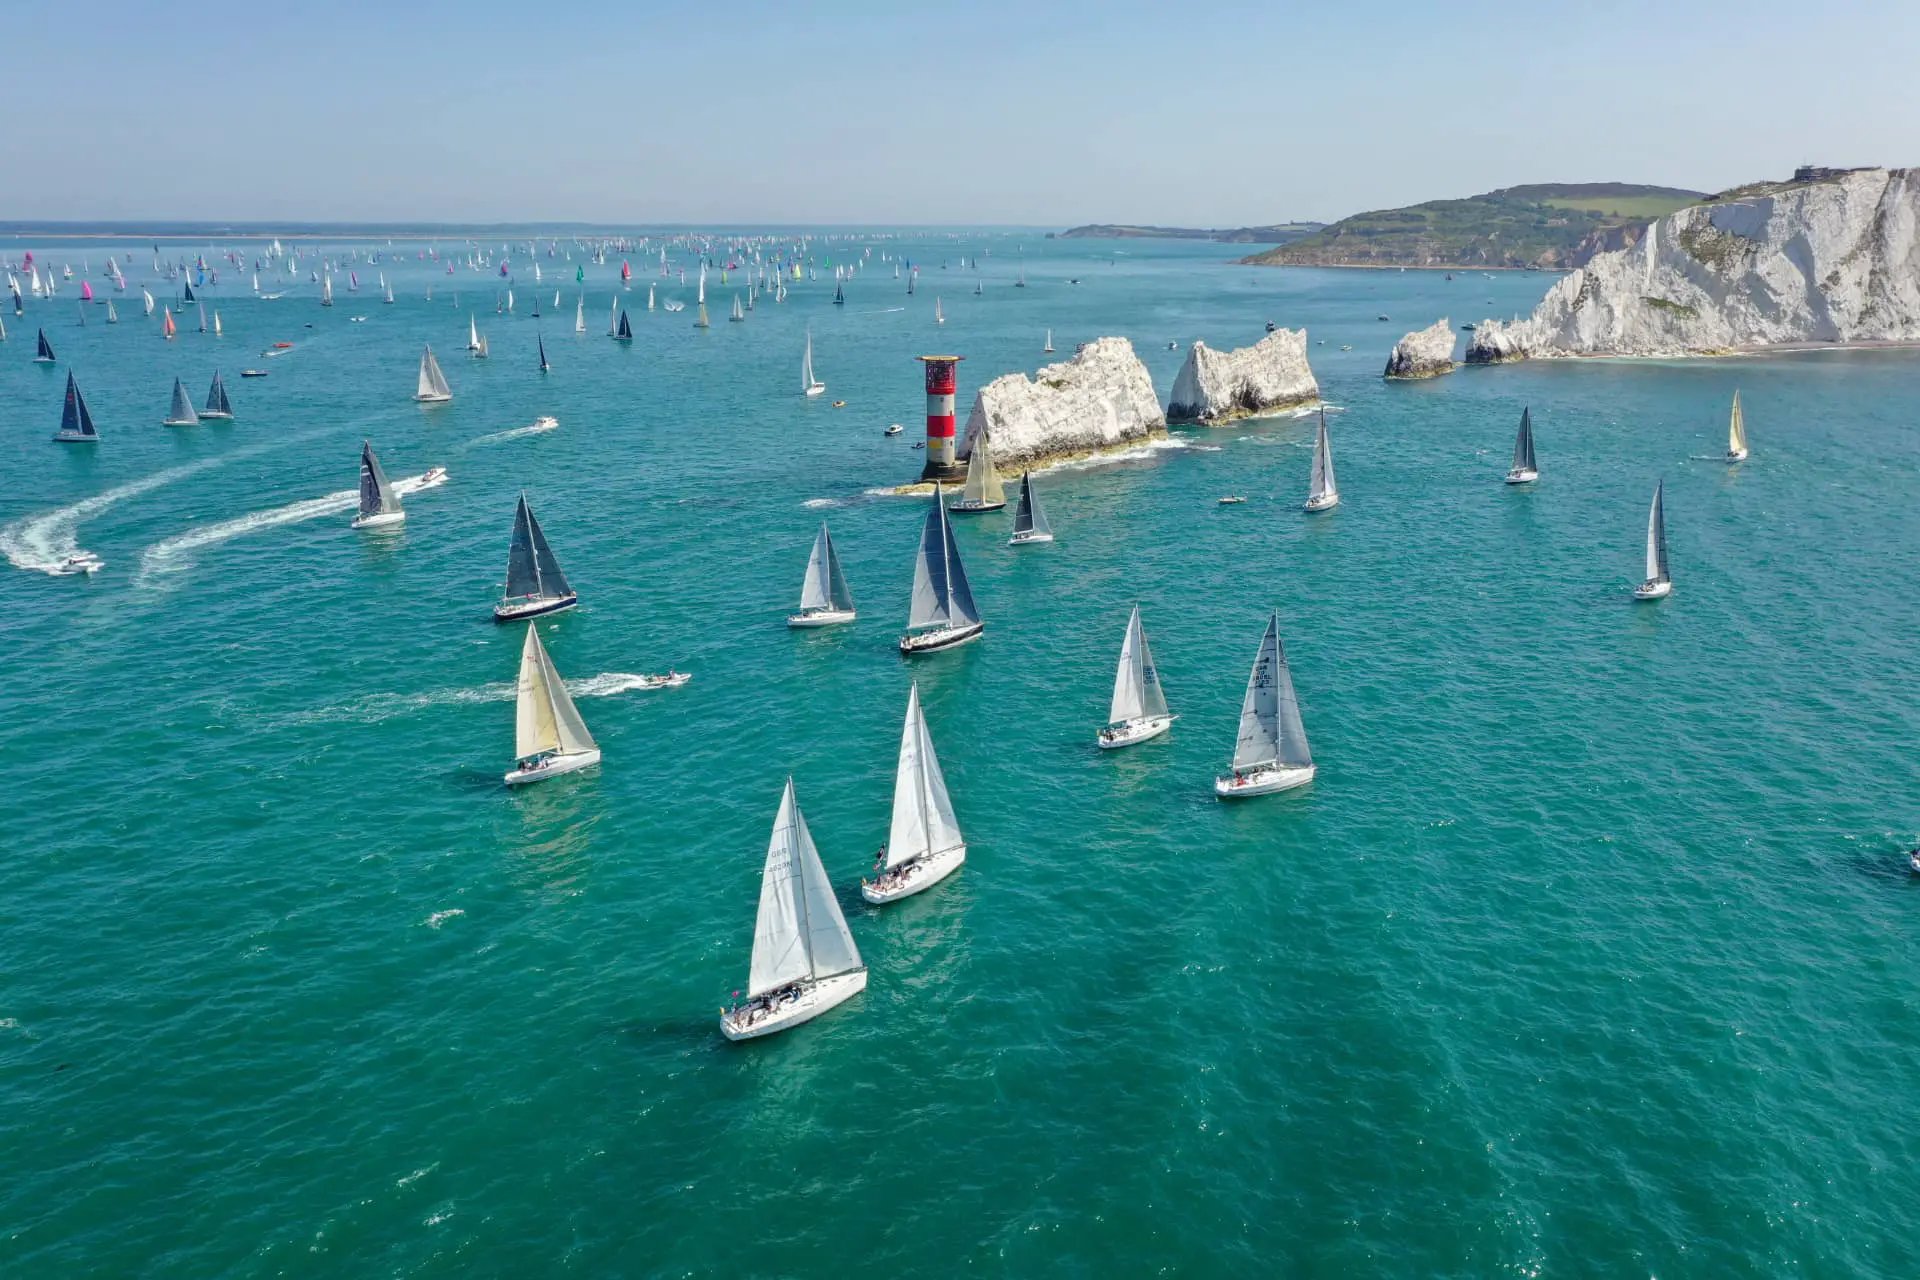 Round the island Race from the air by the Needles - lots of boats in the water